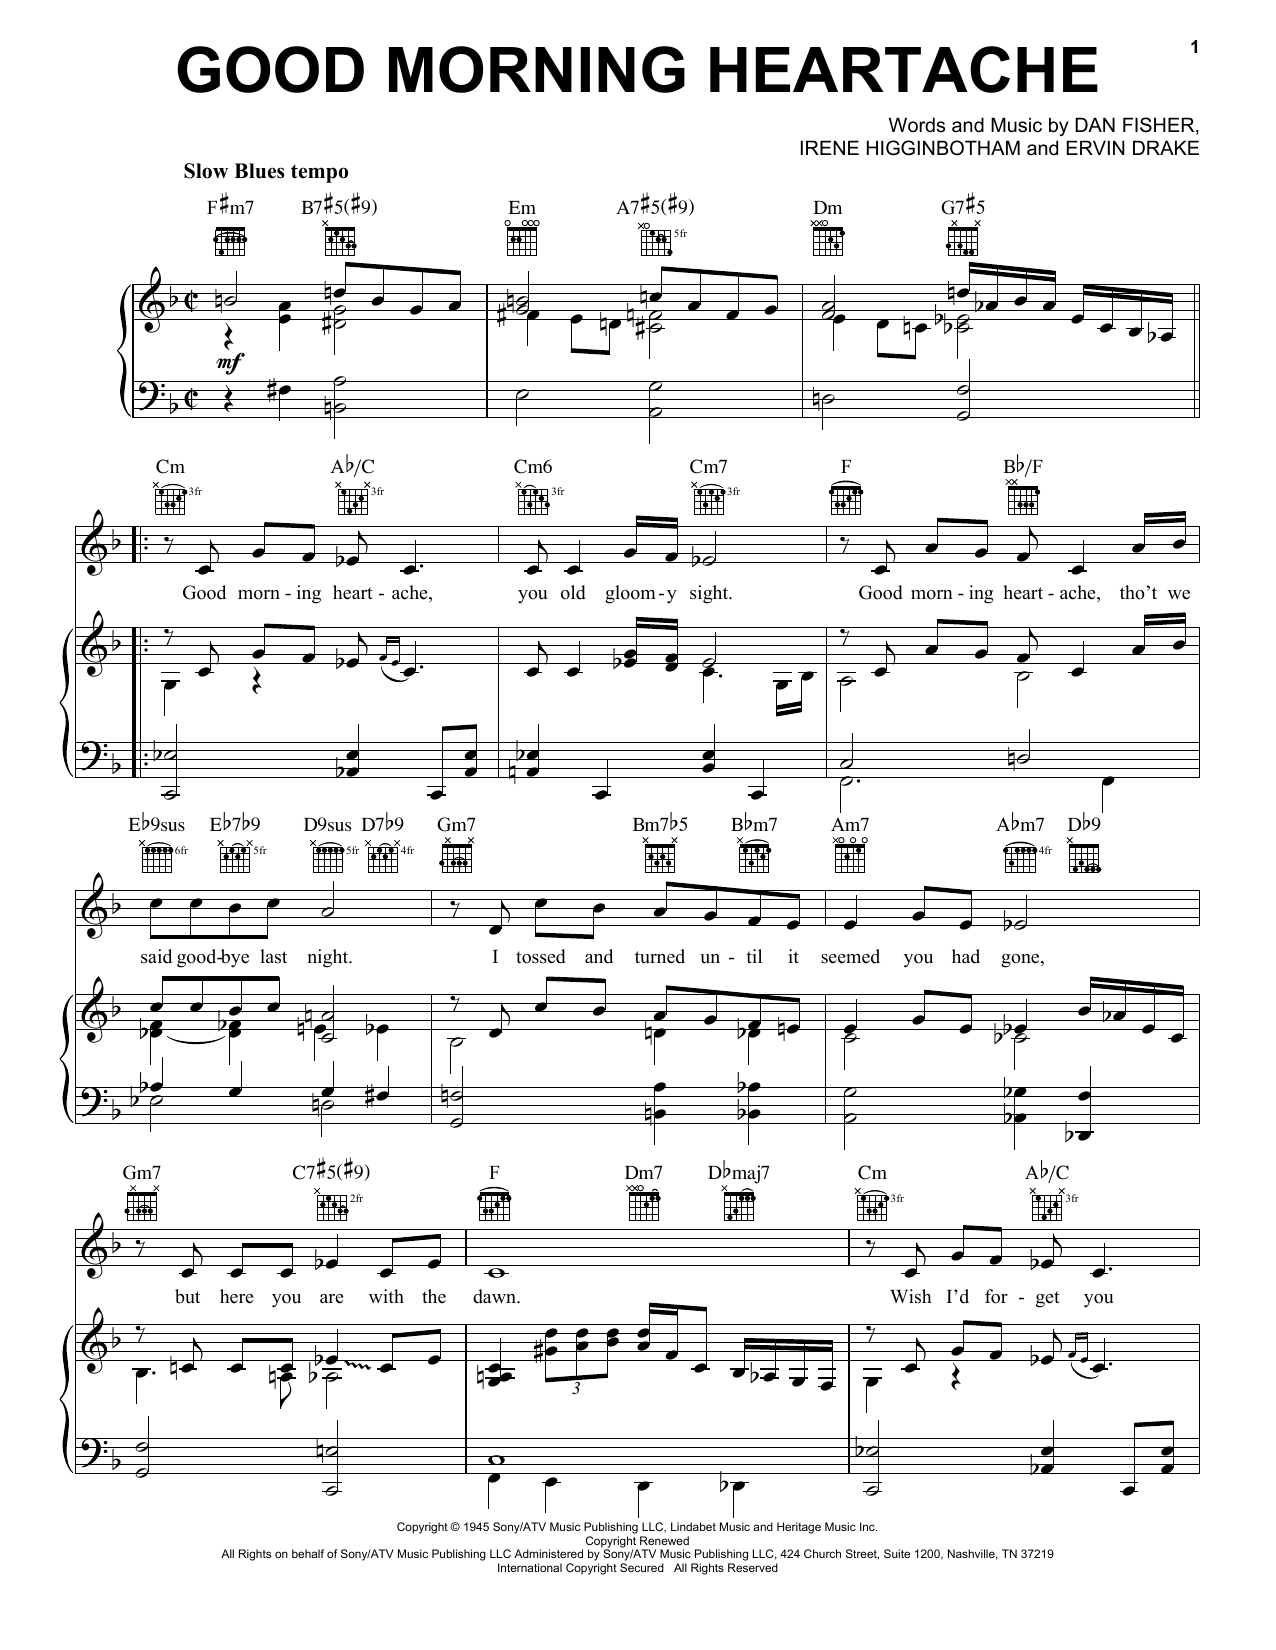 Billie Holiday Good Morning Heartache sheet music notes and chords. Download Printable PDF.